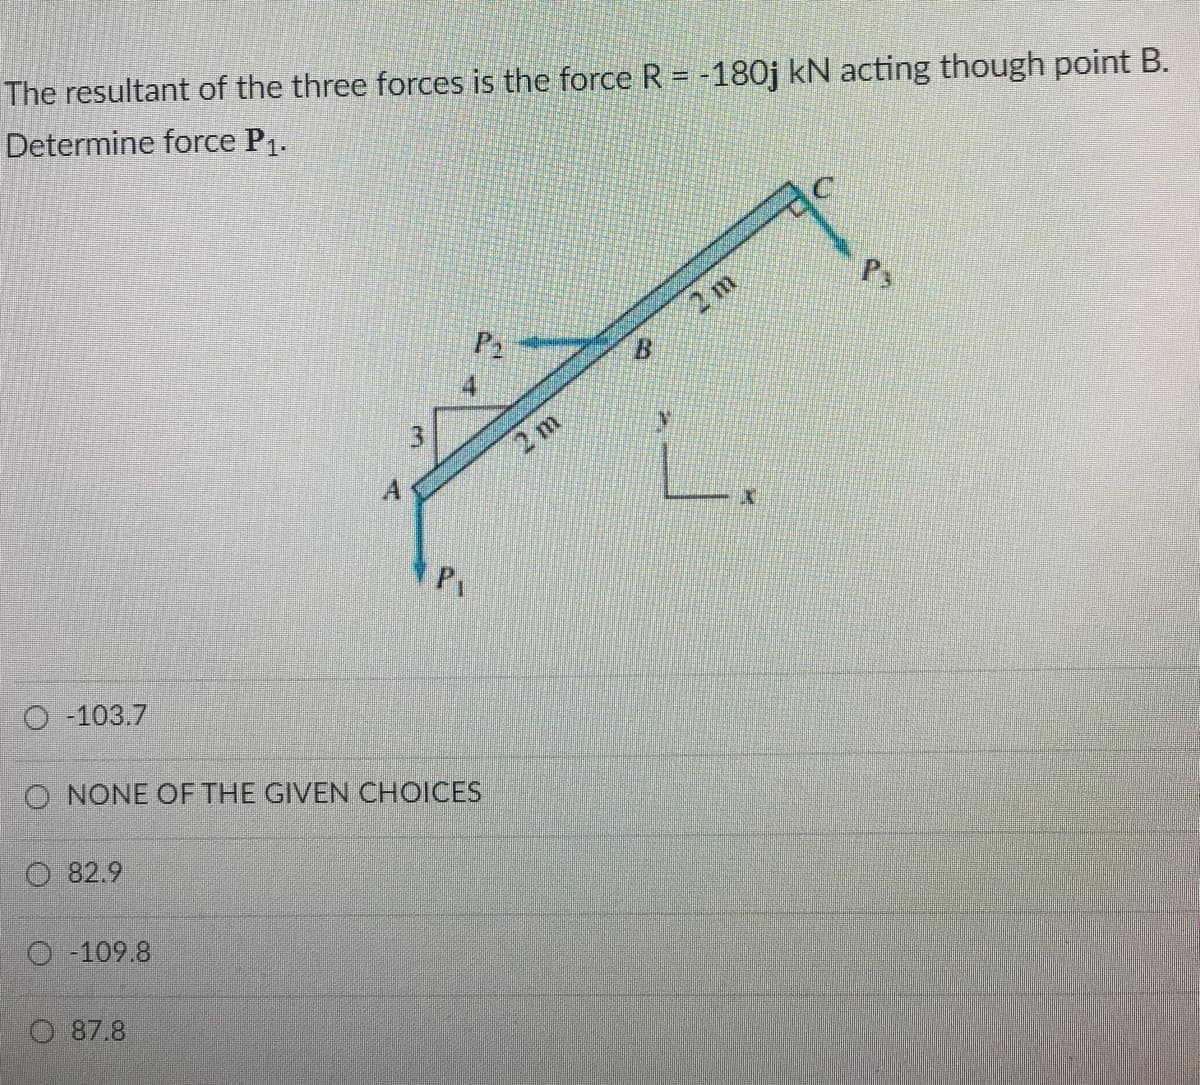 The resultant of the three forces is the force R = -180j kN acting though point B.
Determine force P1.
P2
2 m
2 m
P
O -103.7
O NONE OF THE GIVEN CHOICES
O 82.9
O -109.8
87.8
3.
